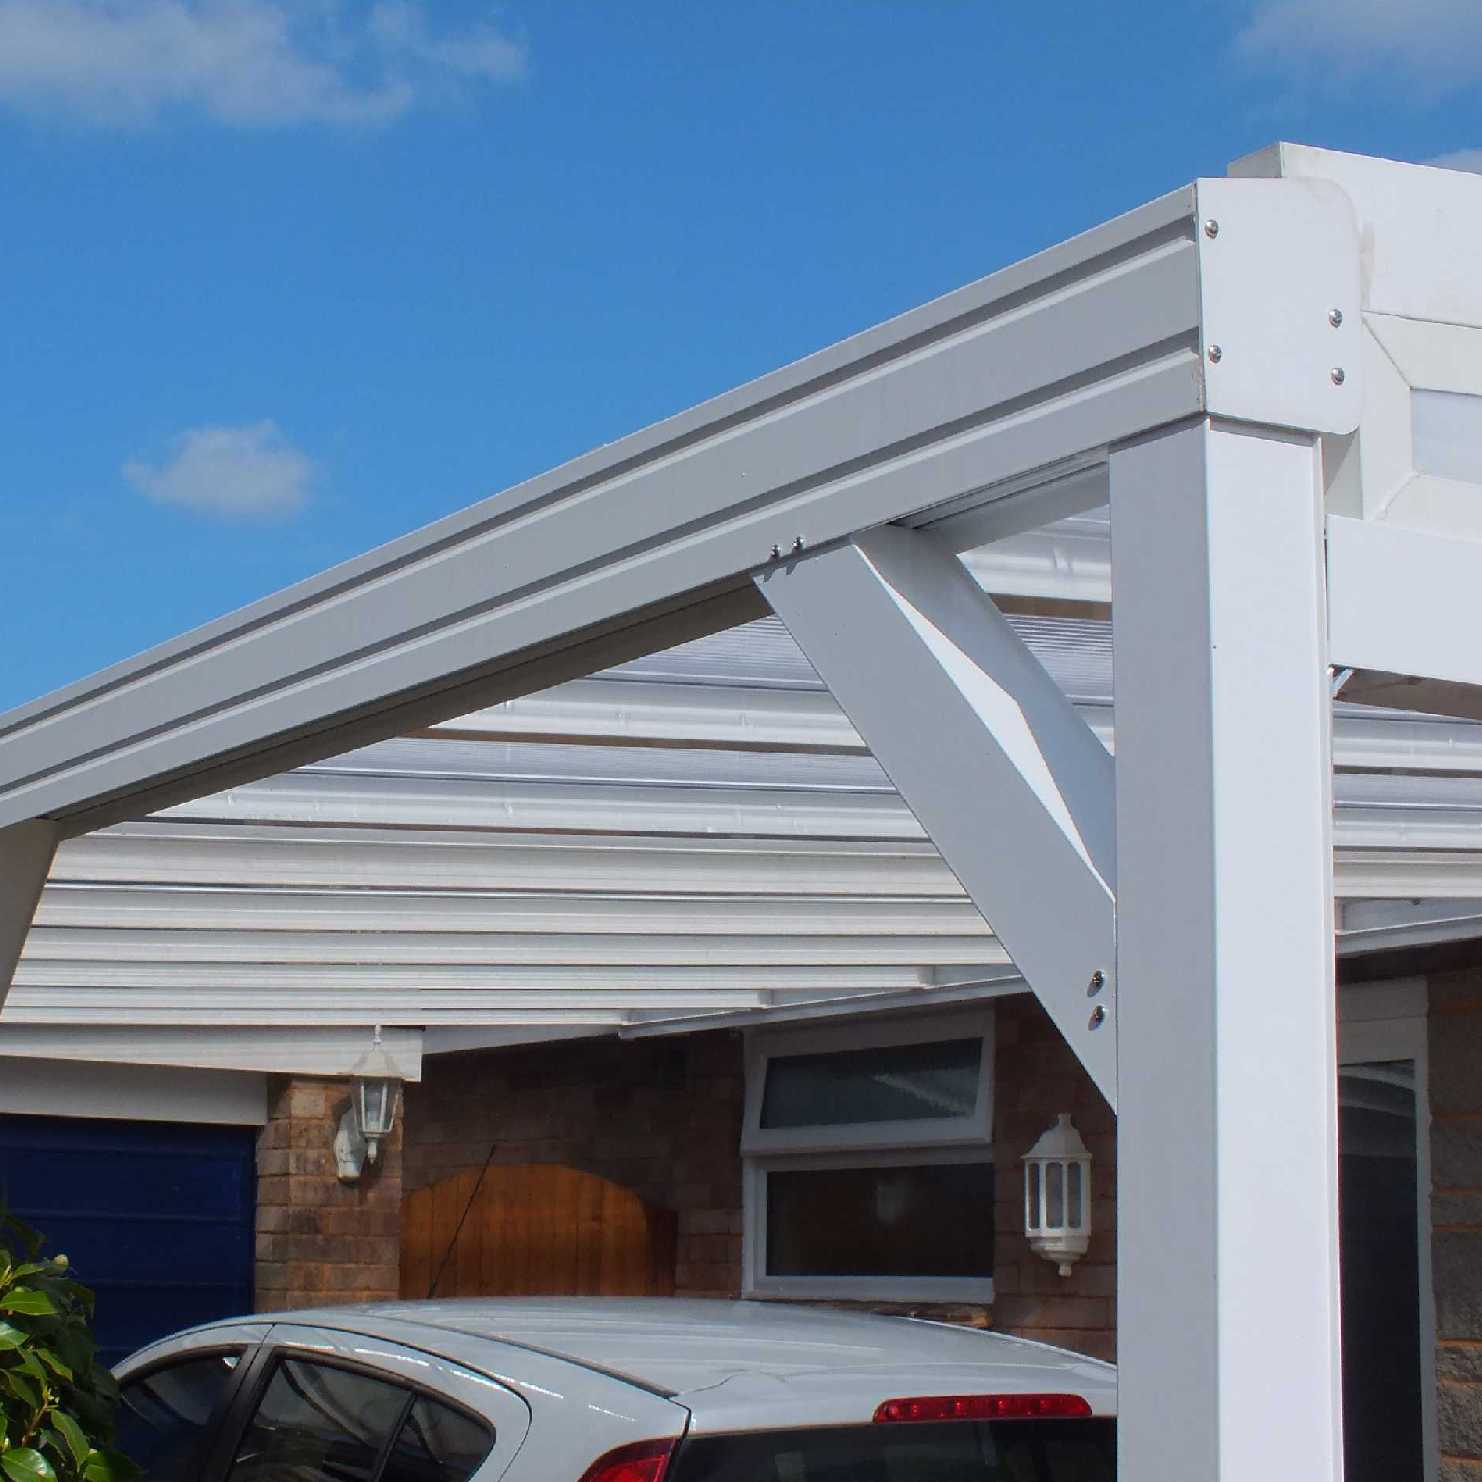 Buy Omega Smart Lean-To Canopy, White with 16mm Polycarbonate Glazing - 10.7m (W) x 4.5m (P), (5) Supporting Posts online today